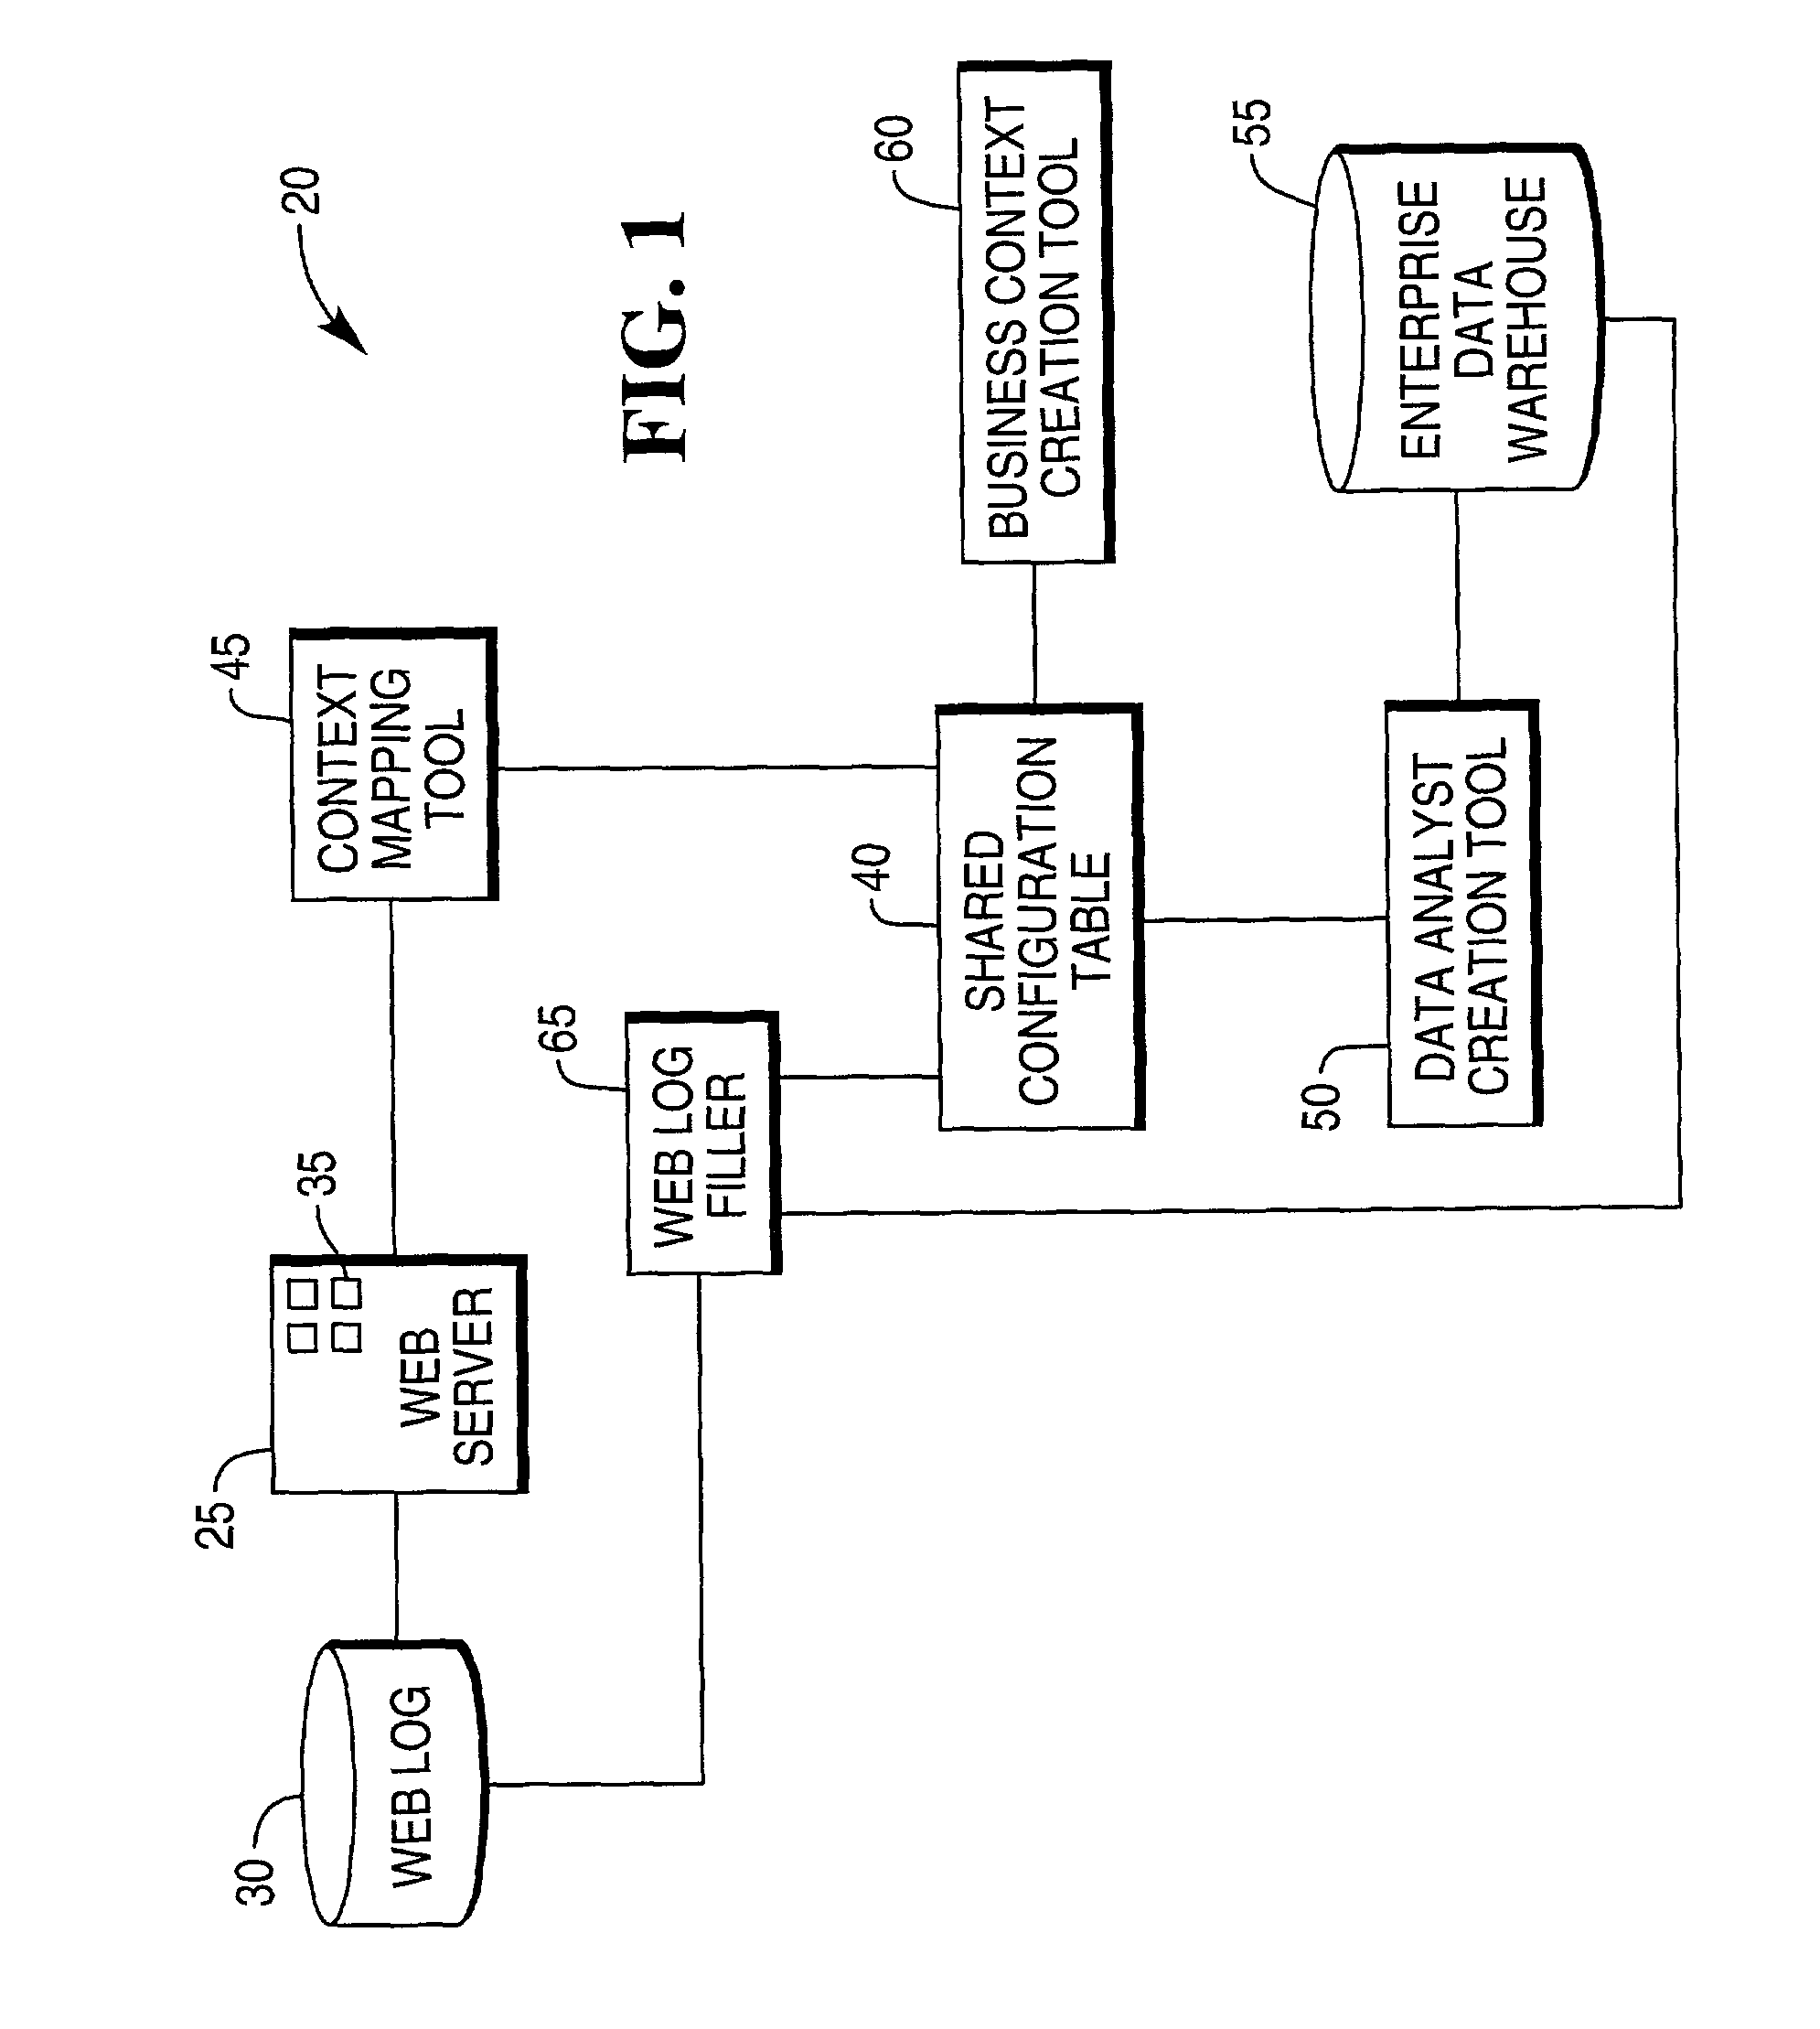 System for capturing a business context of a user's interaction with a website and method for the same